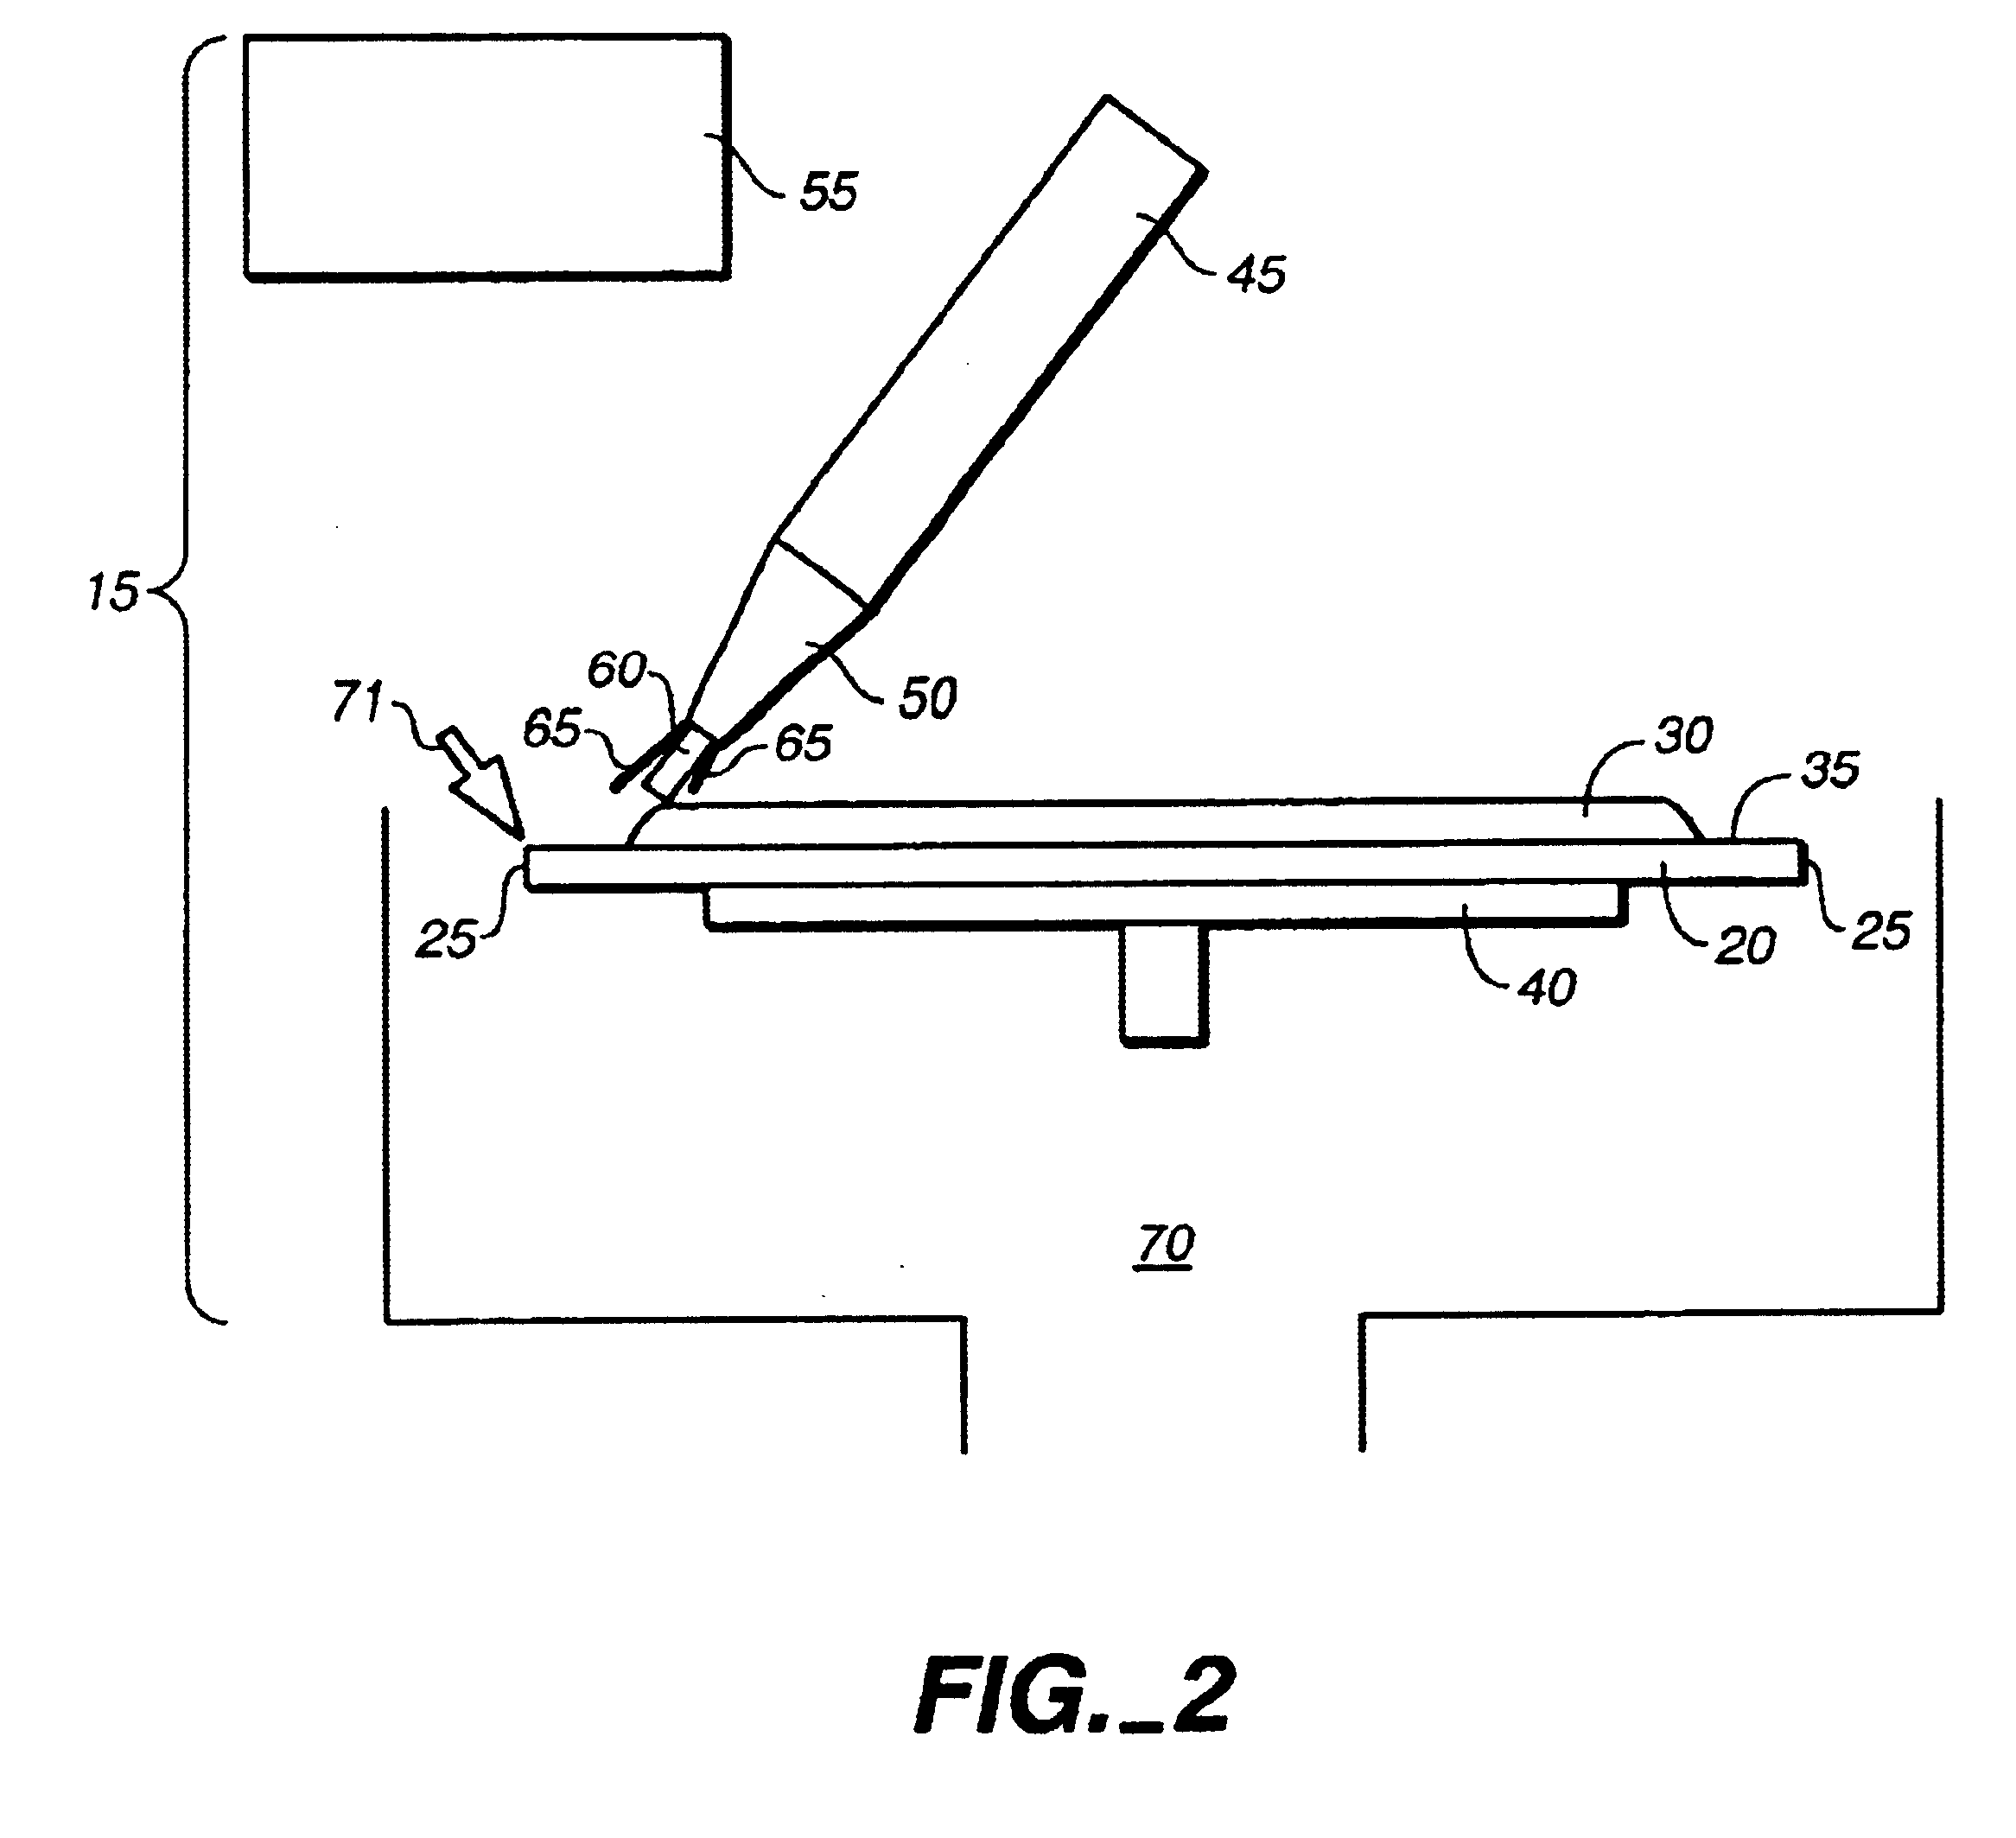 Method to use a laser to perform the edge clean operation on a semiconductor wafer